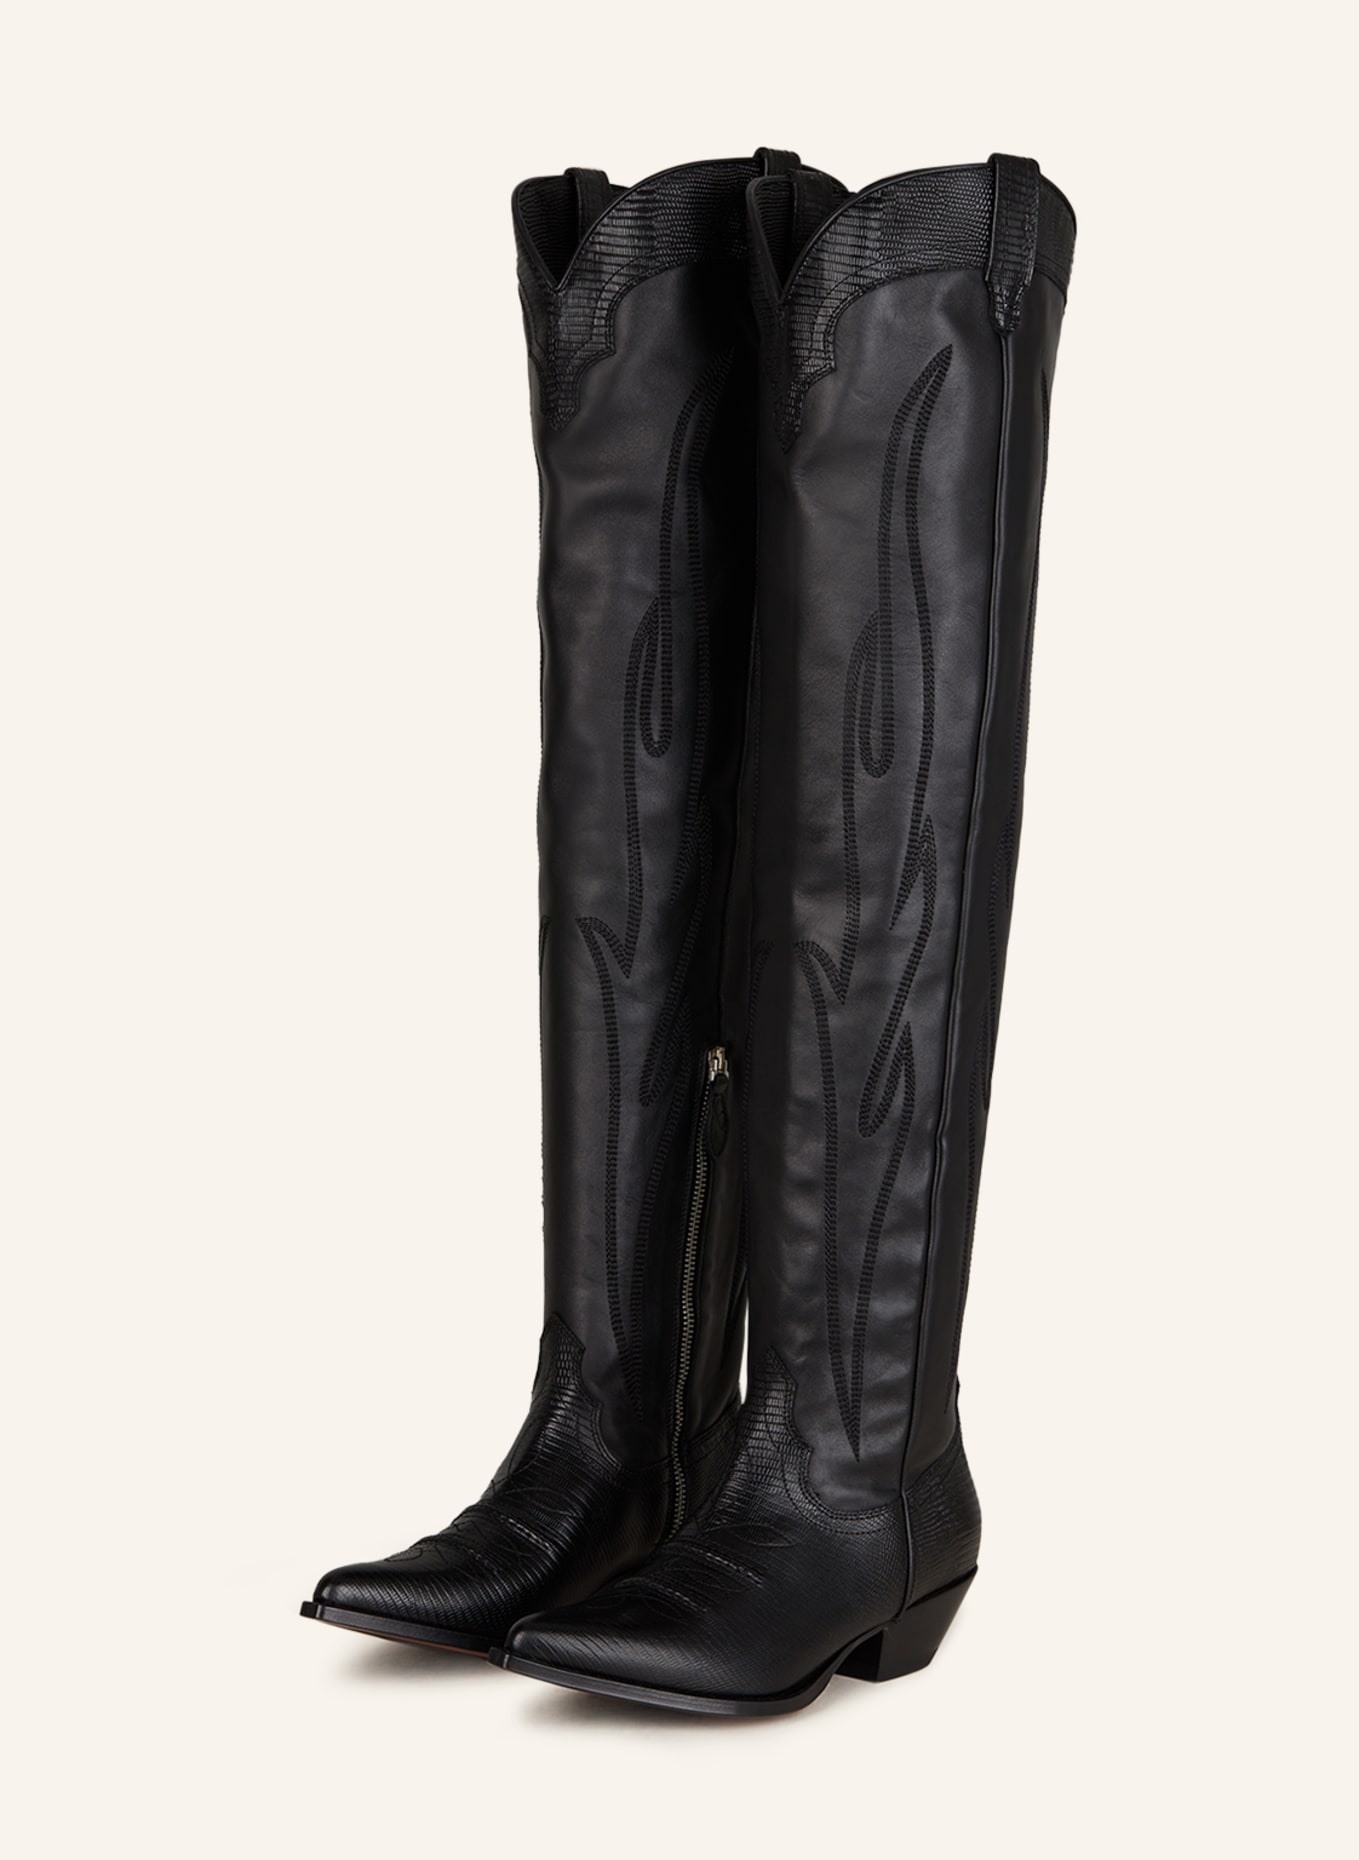 SONORA Over the knee boots HERMOSA in black